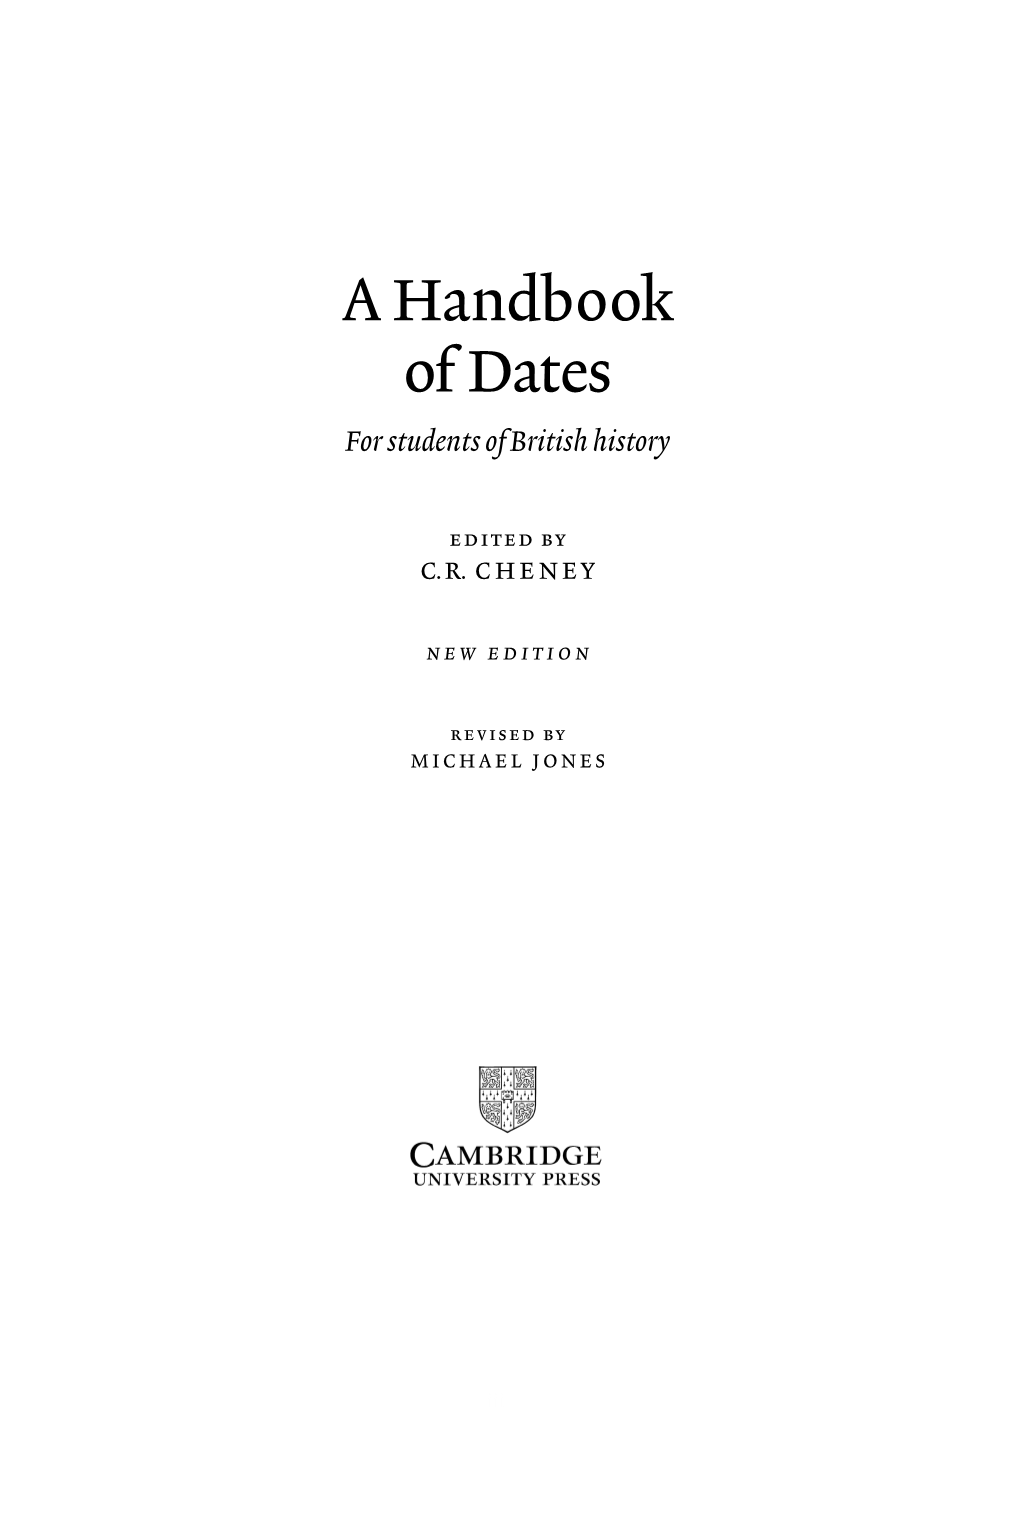 A Handbook of Dates for Students of British History